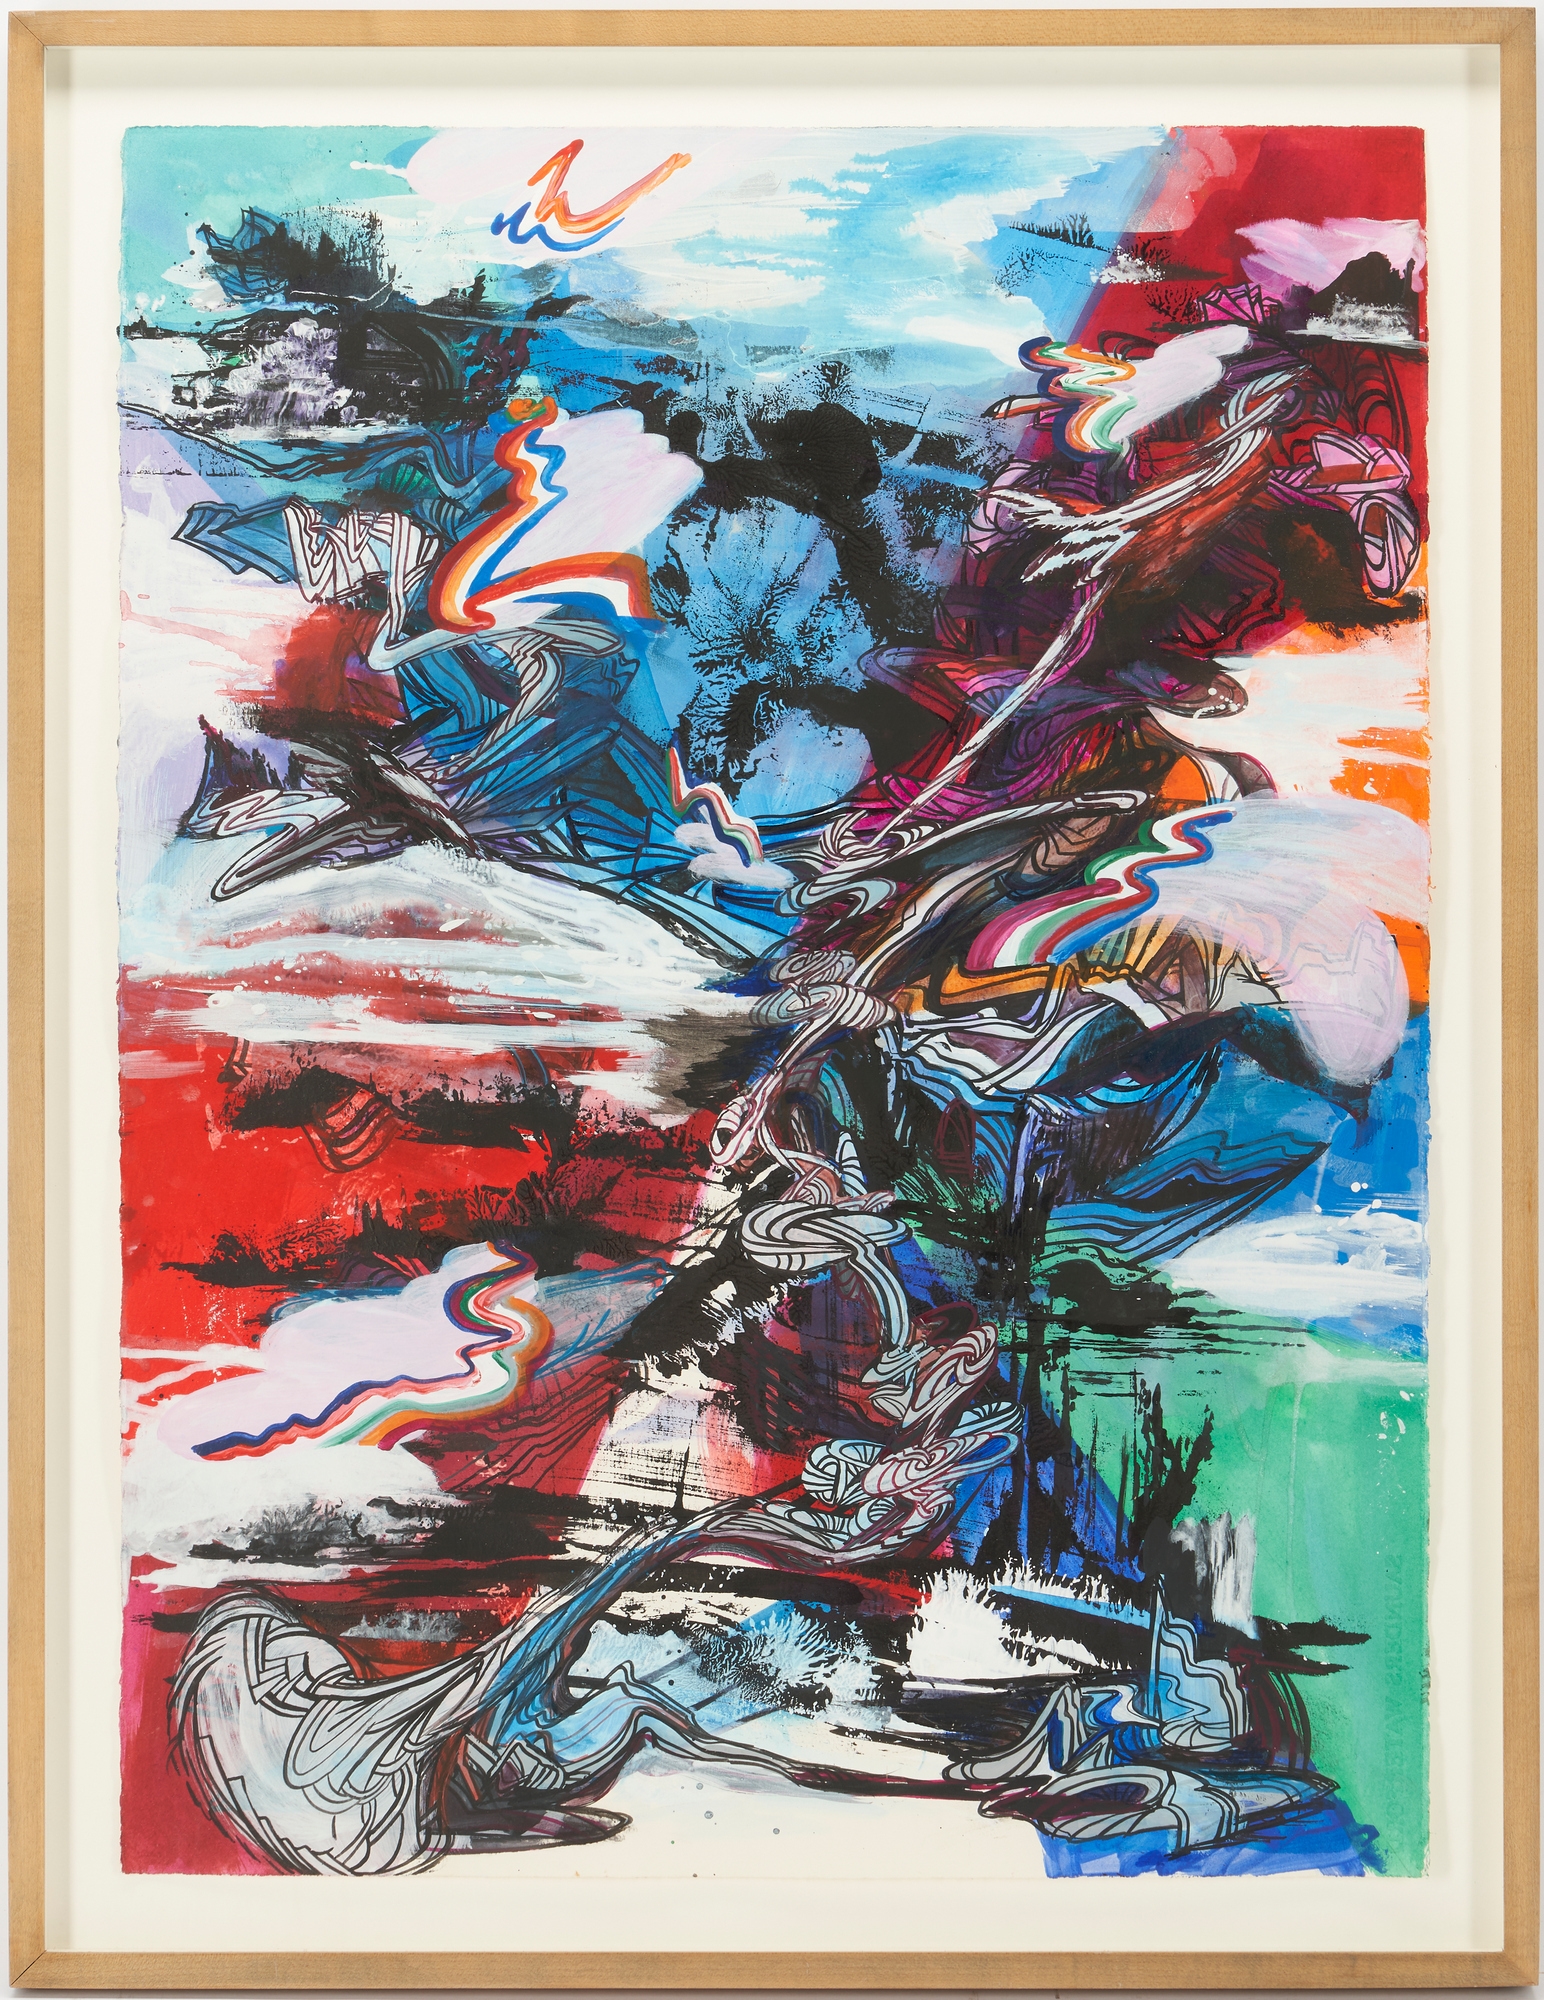 Wang Suling Mixed Media Abstract Painting, Untitled, 2006, 3 of 3 by Suling Wang